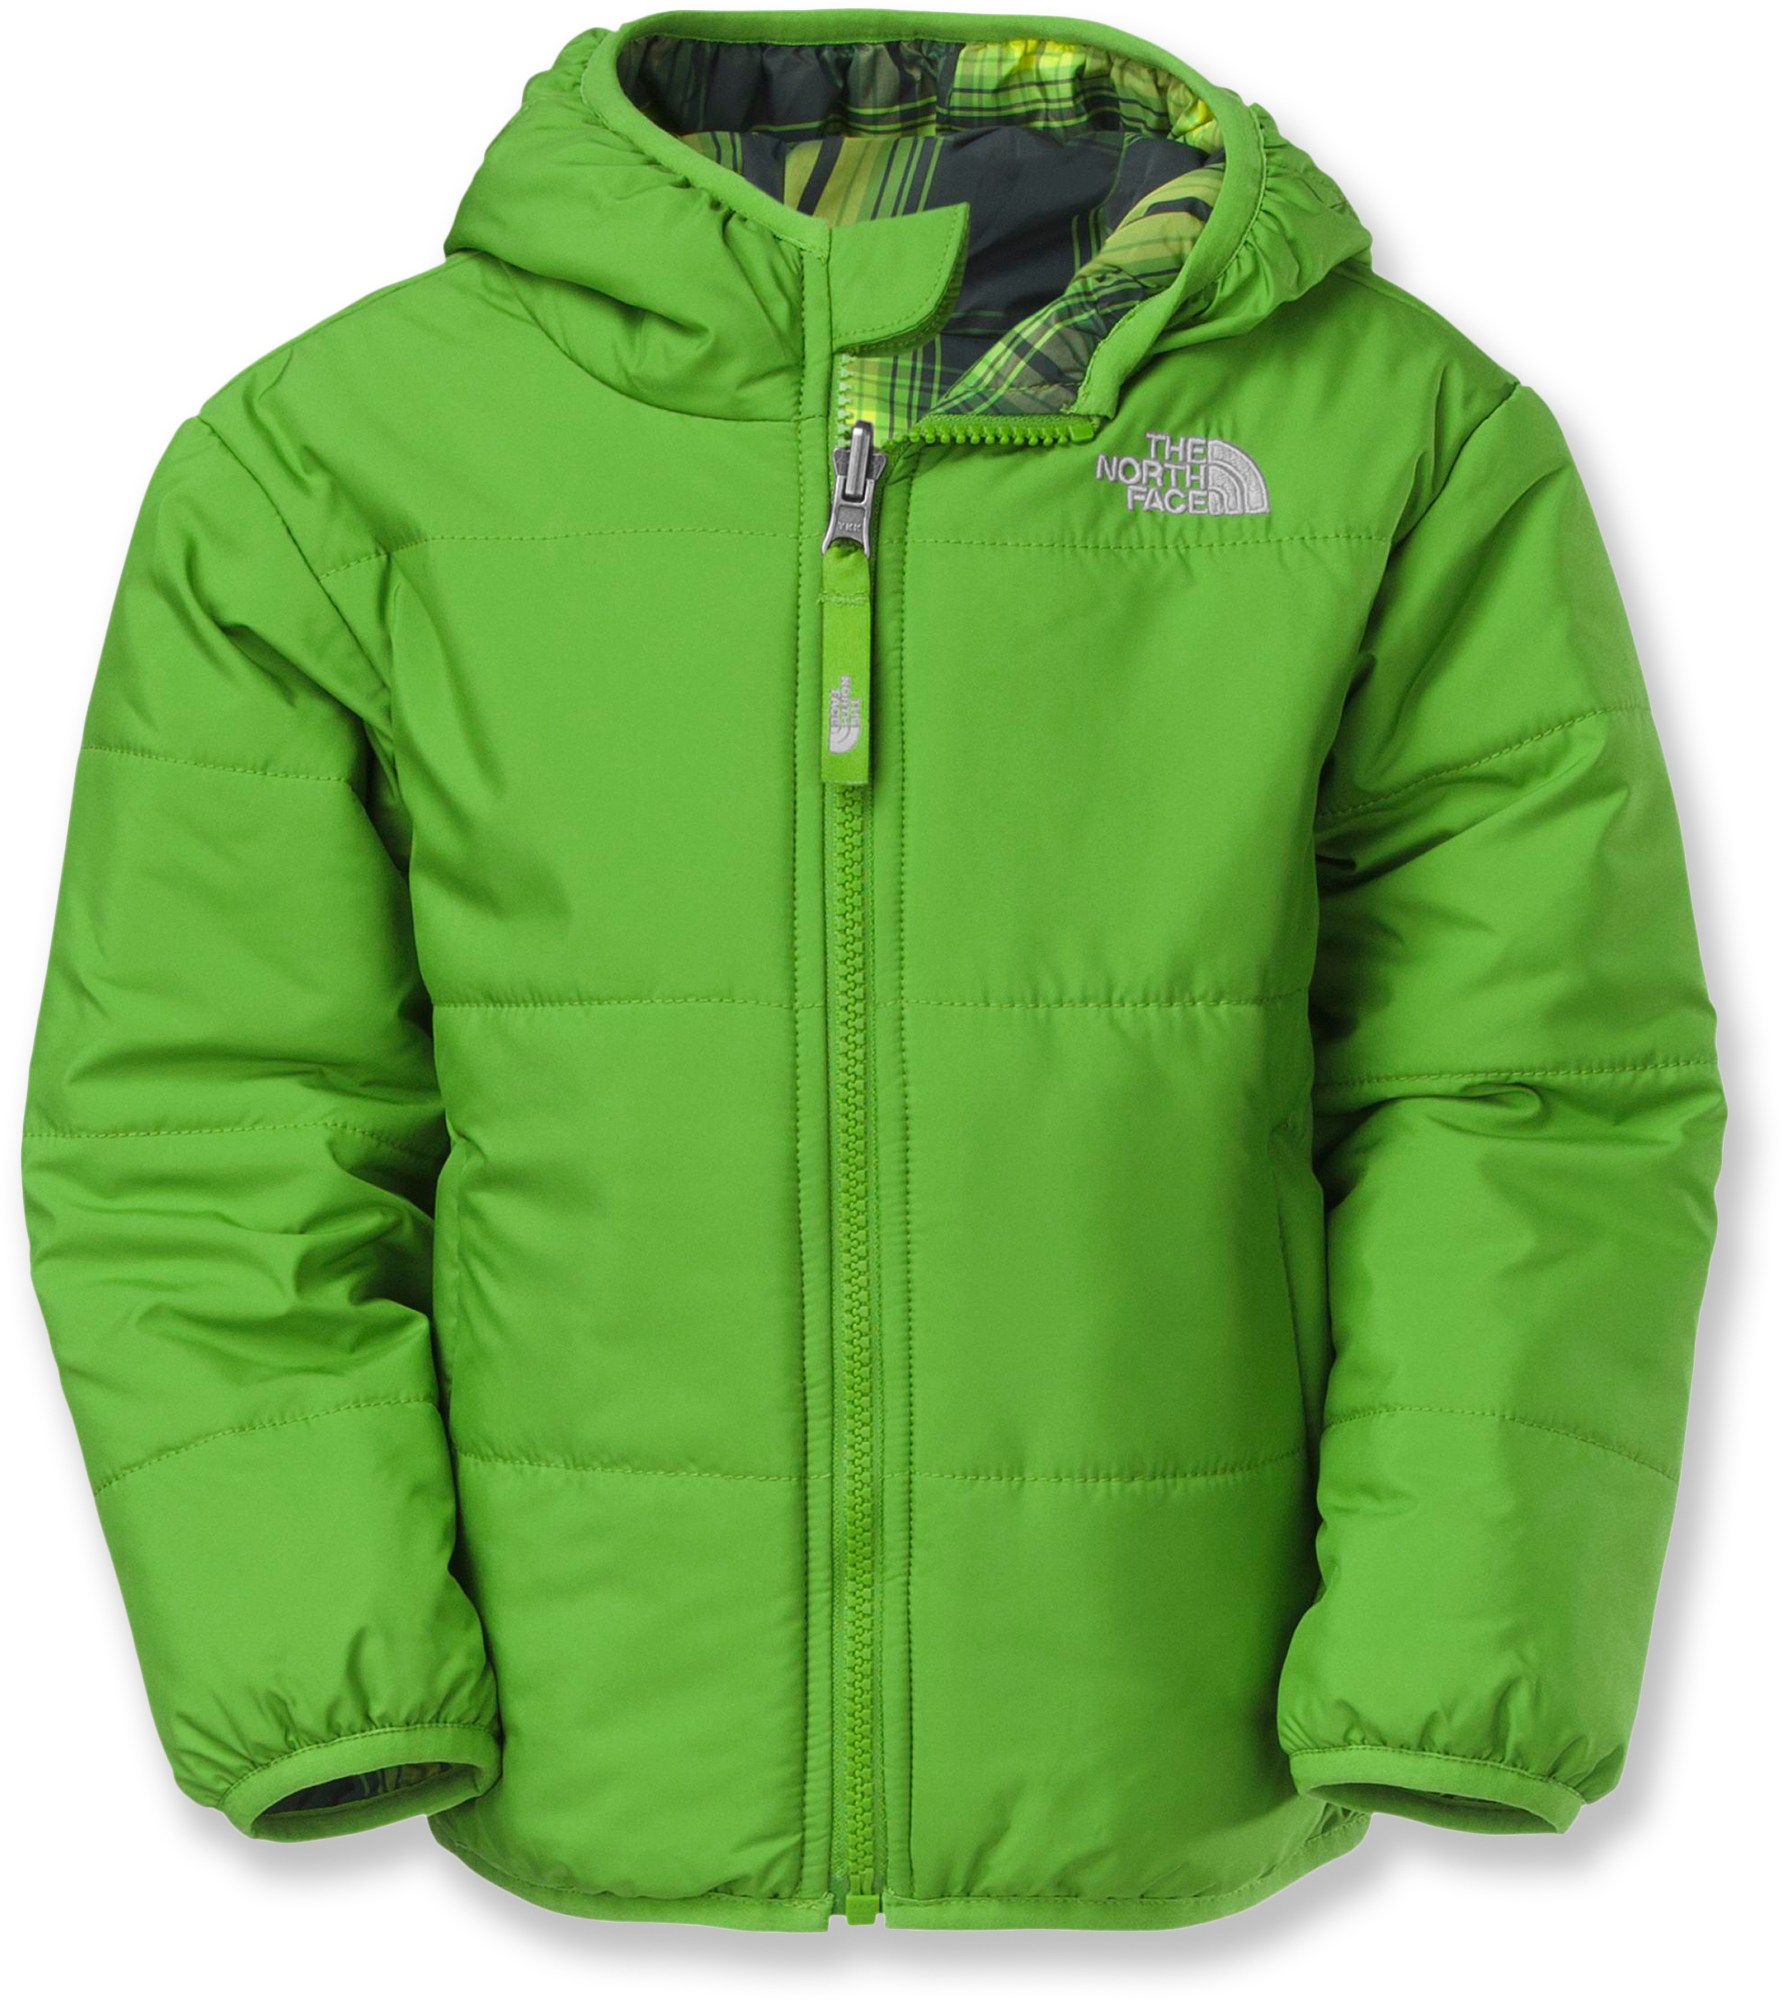 The North Face Perrito Reversible Insulated Jacket - Toddler Boys' - Free Shipping at REI.com